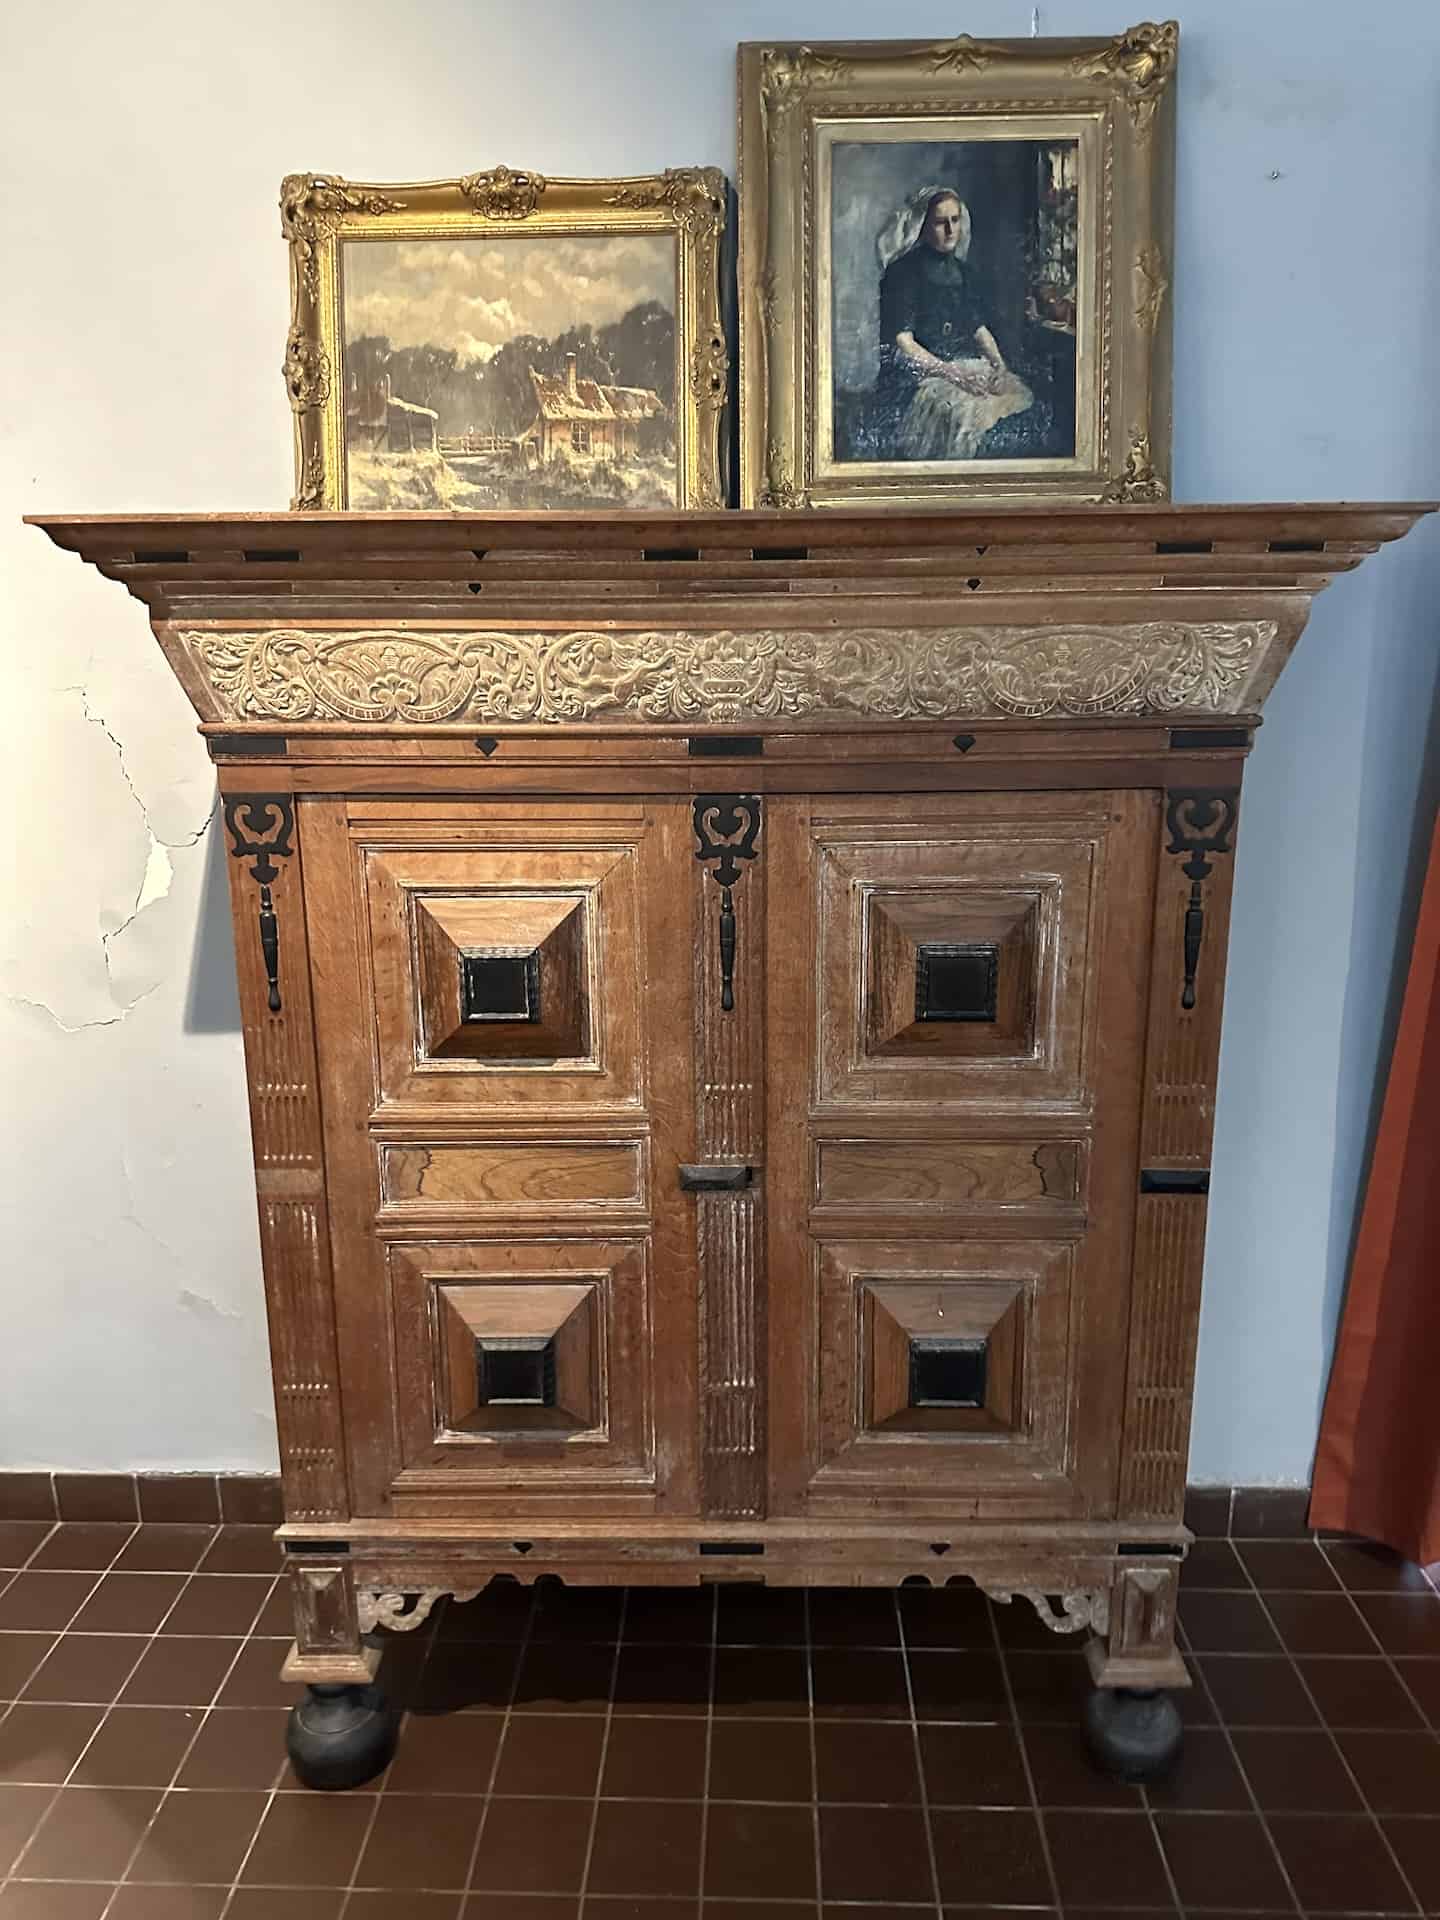 Armoire at the Historical Museum of Aruba in Oranjestad